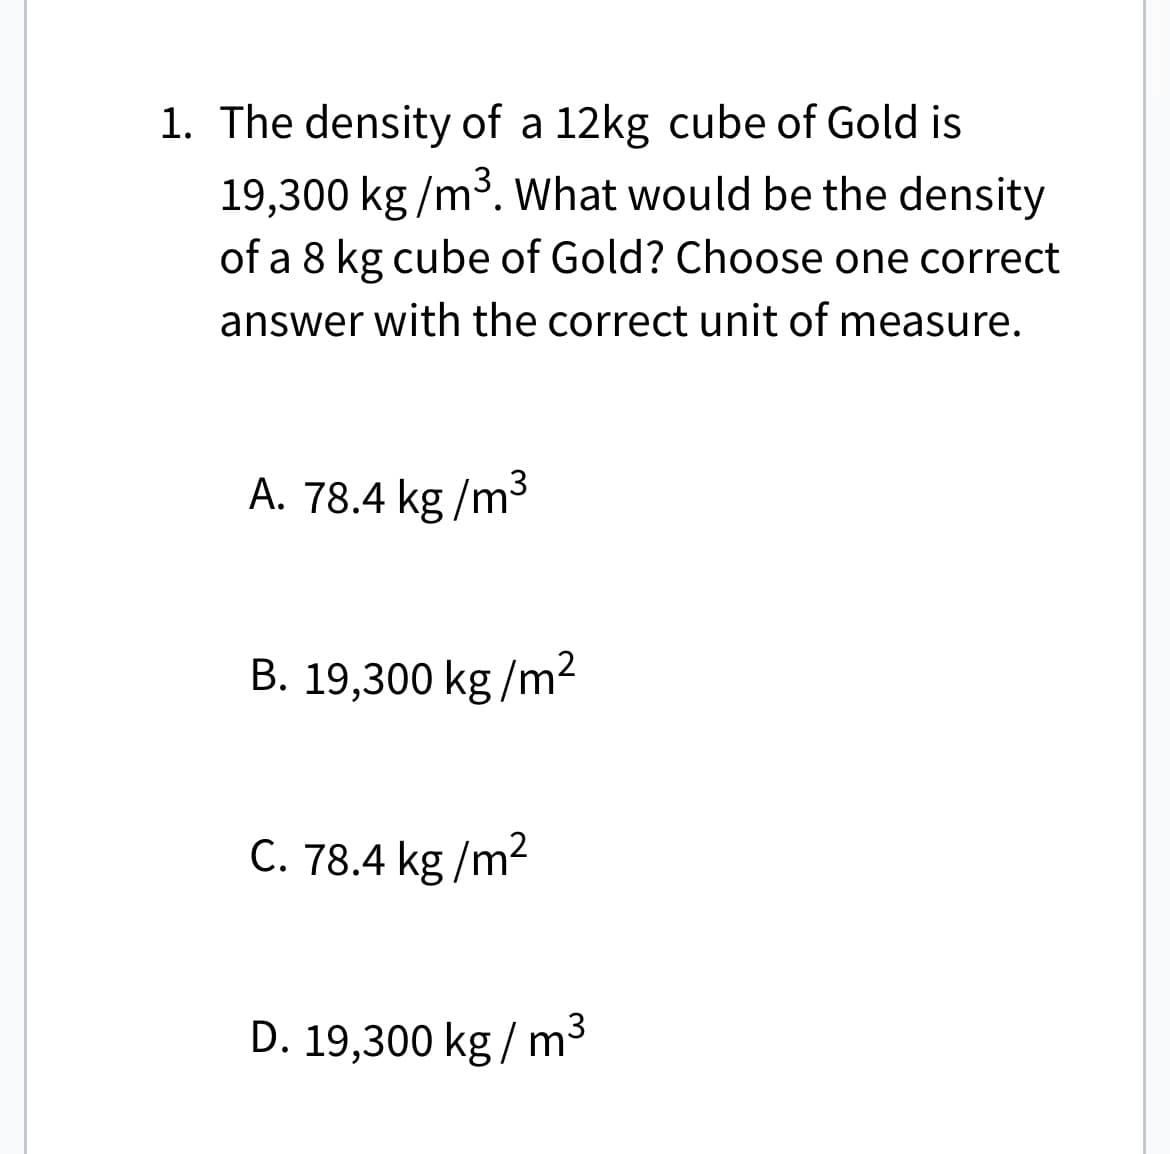 1. The density of a 12kg cube of Gold is
19,300 kg/m³. What would be the density
of a 8 kg cube of Gold? Choose one correct
answer with the correct unit of measure.
A. 78.4 kg/m³
B. 19,300 kg/m²
C. 78.4 kg/m²
D. 19,300 kg/m³